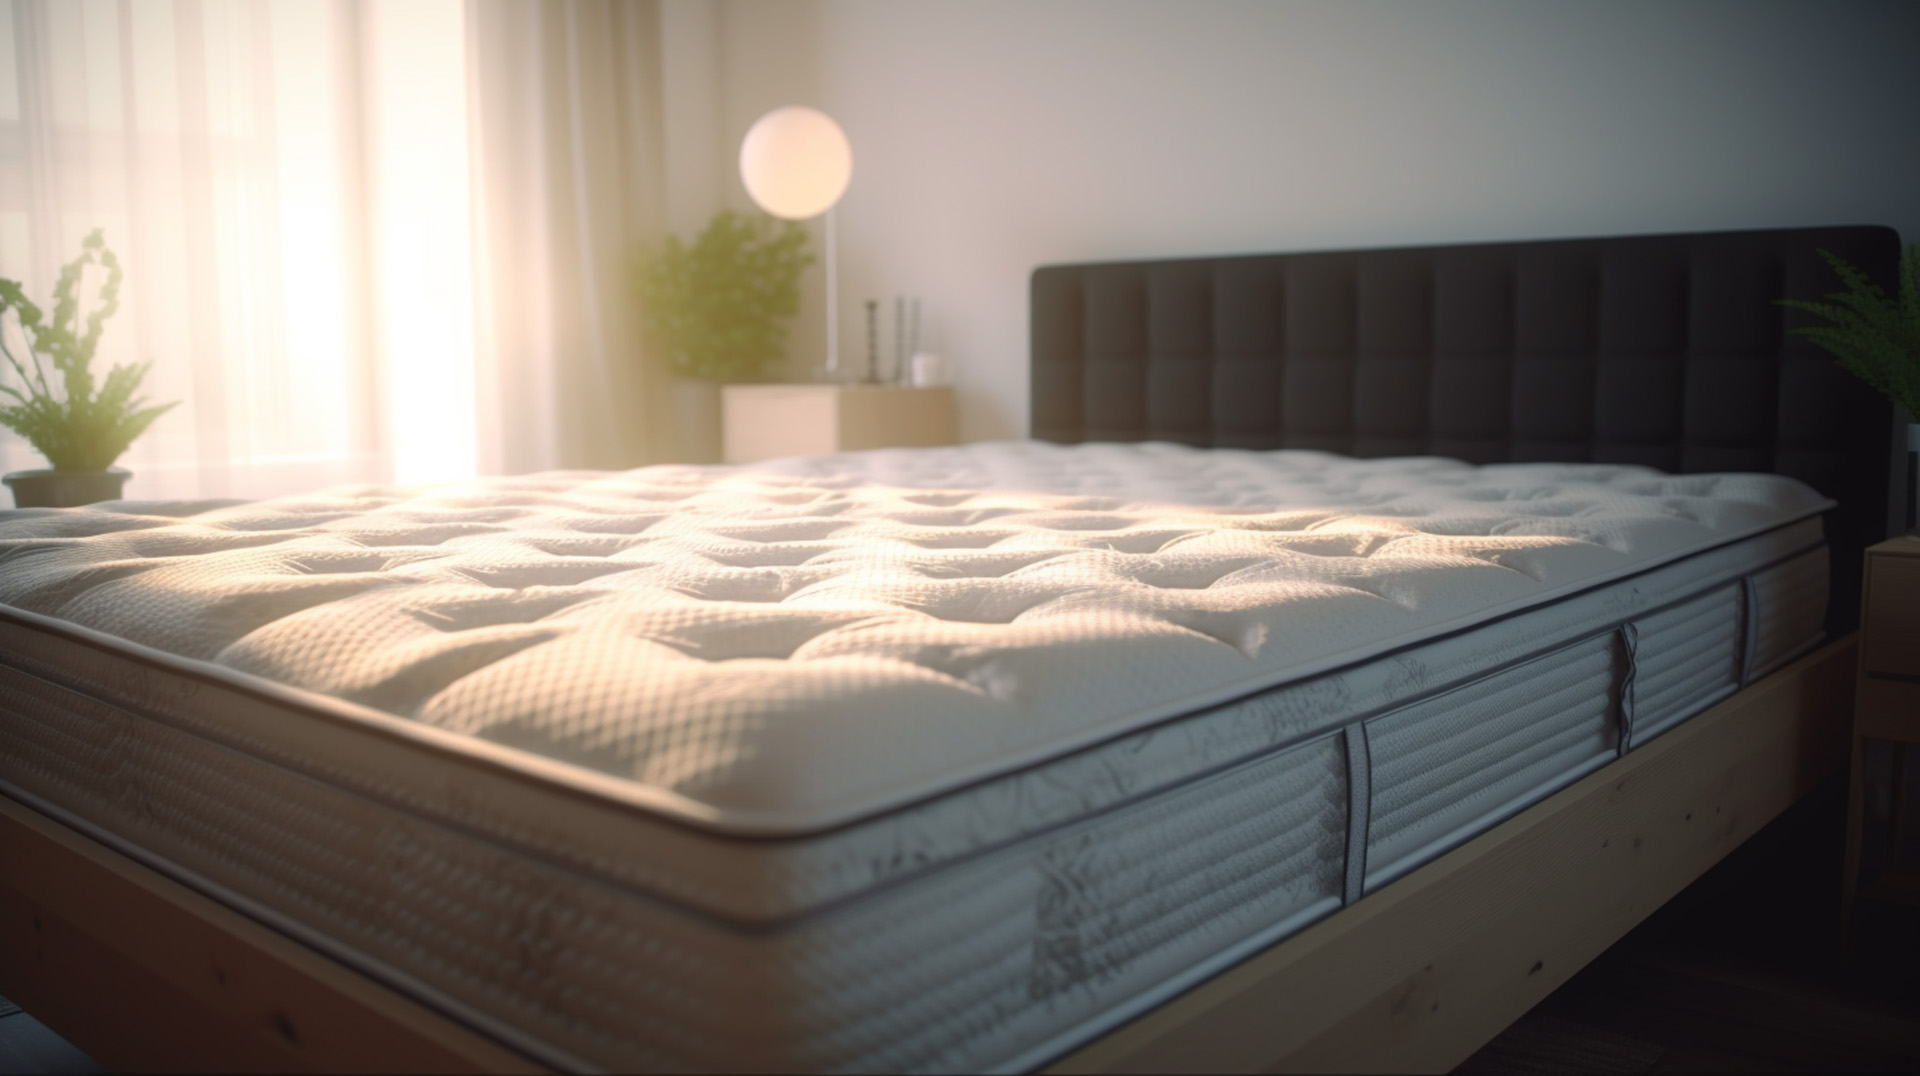 Shop Organic Mattresses and Beds in Des Moines, IA